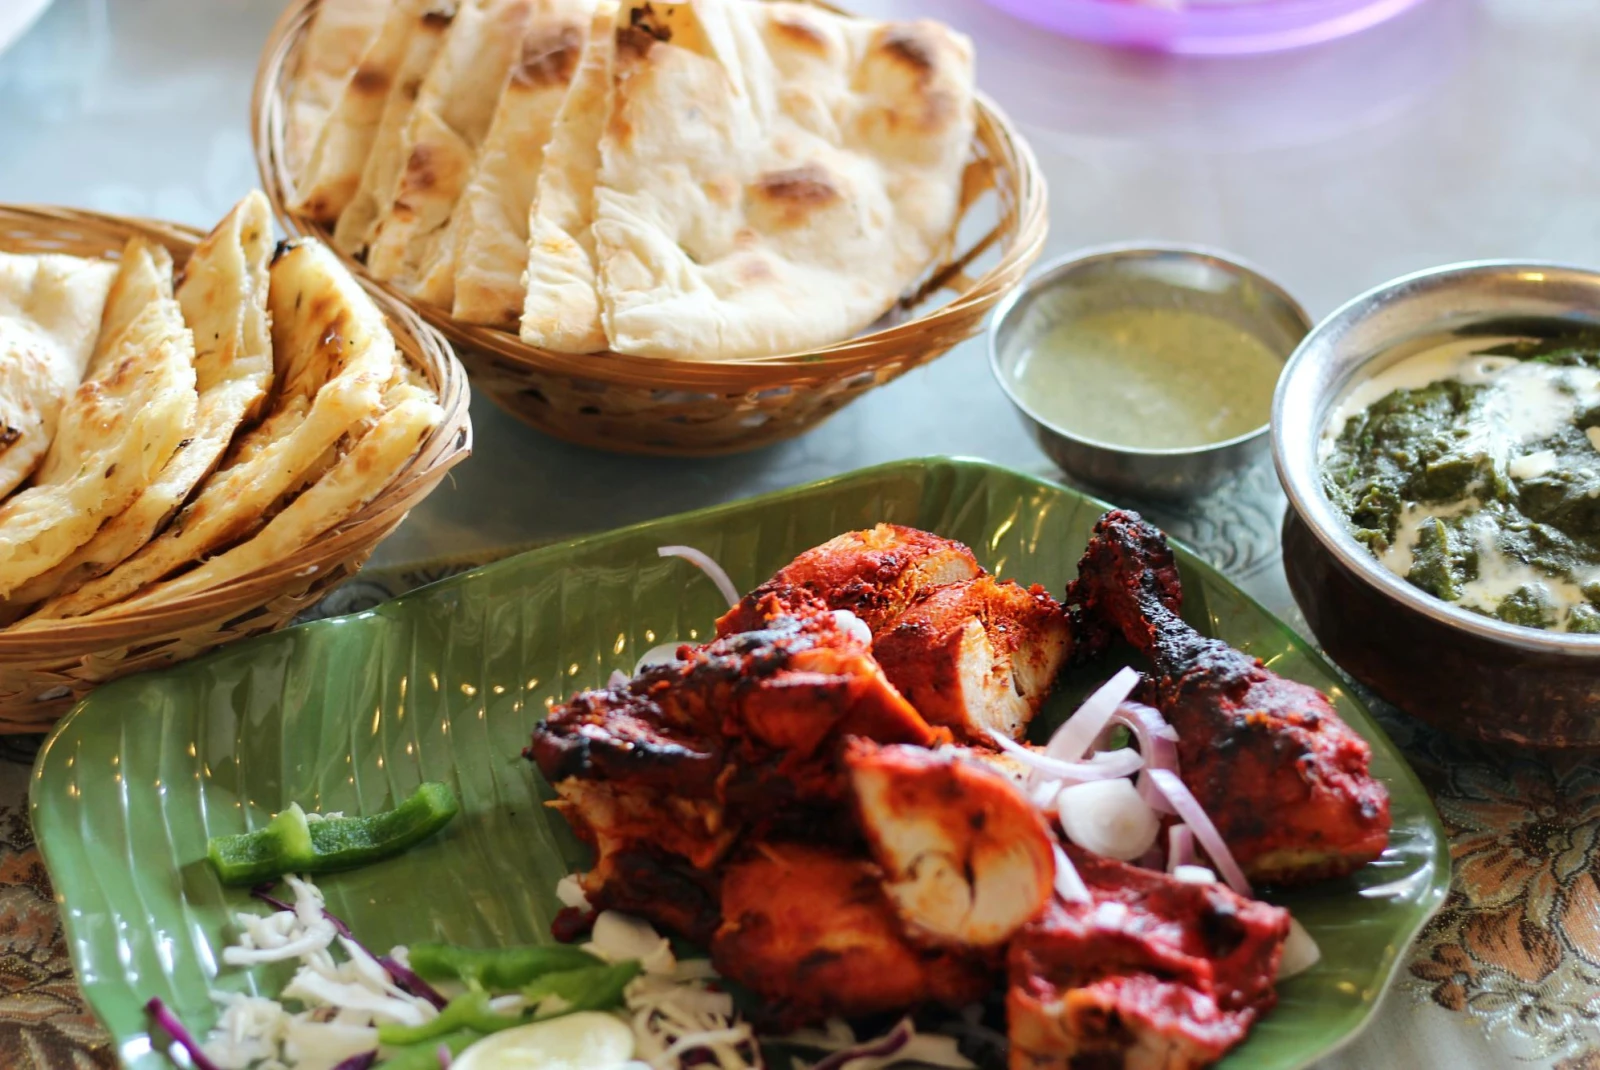 Tandoori chicken and naan with sauces on restaurant table.